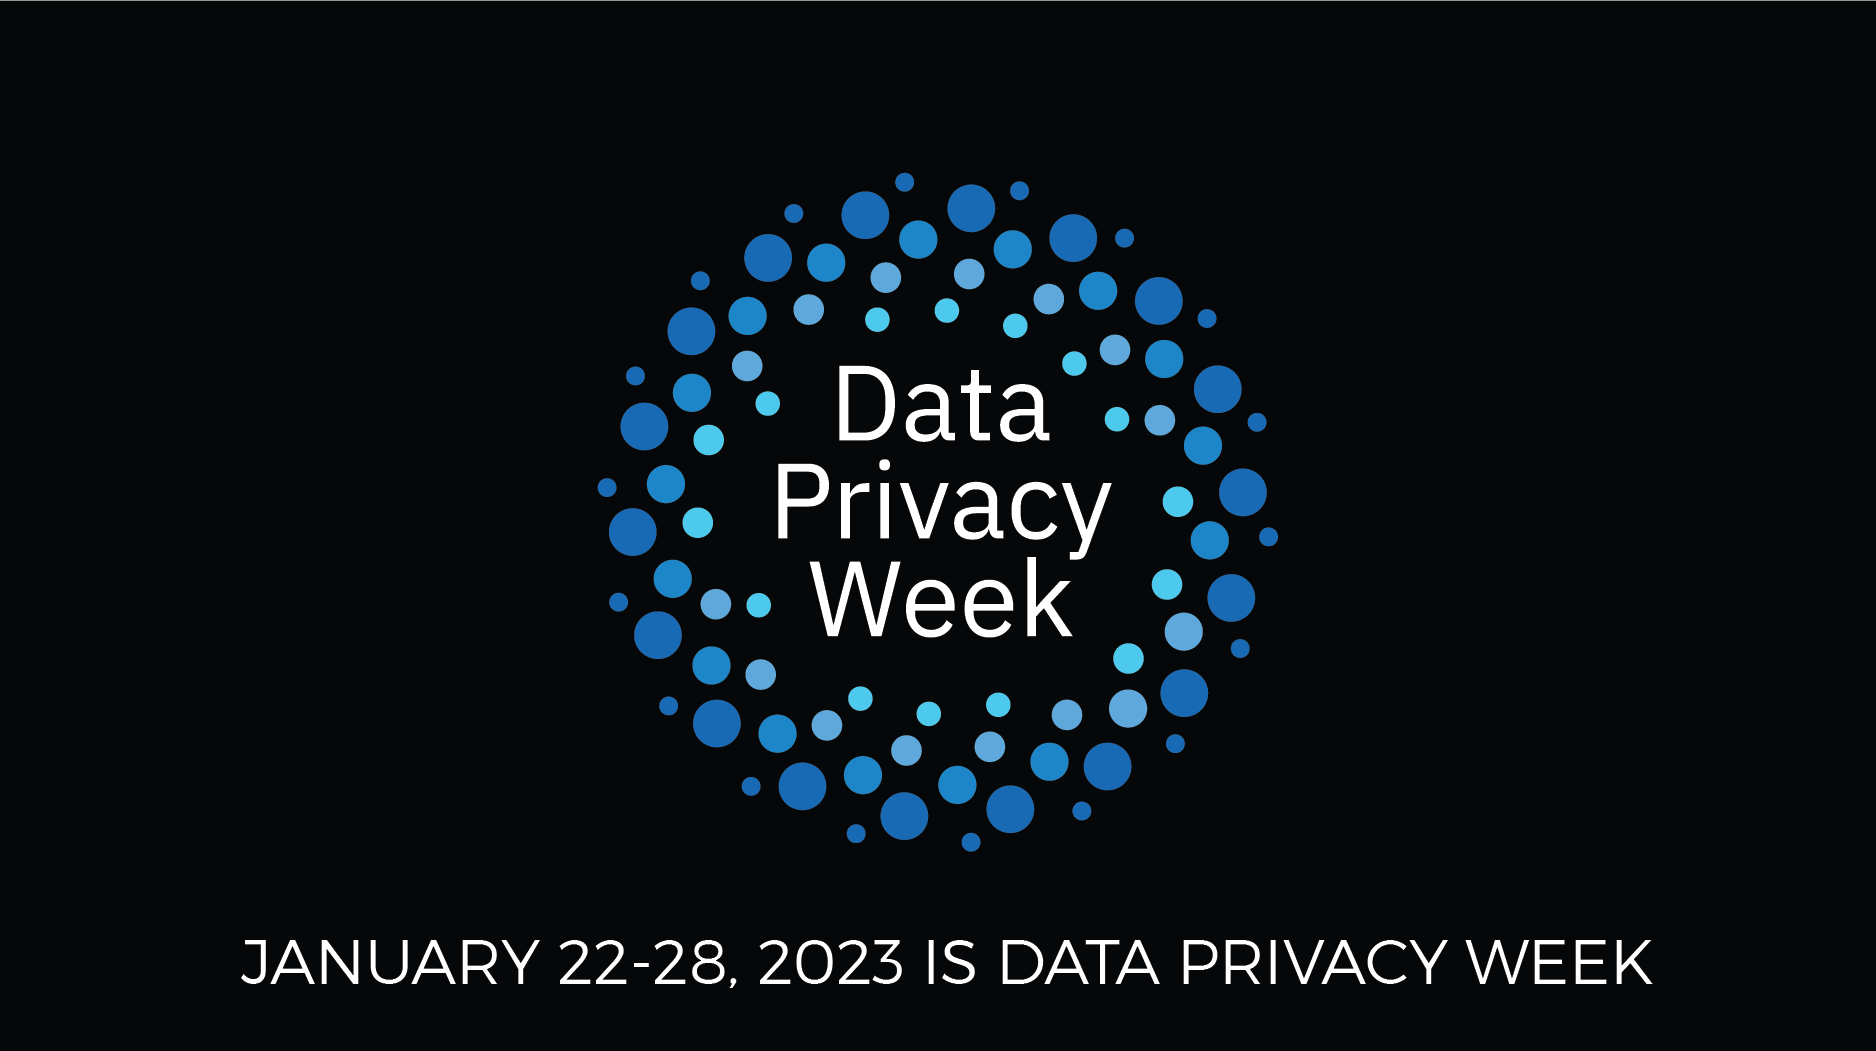 Data Privacy Week: January 22-28, 2023 is data privacy week